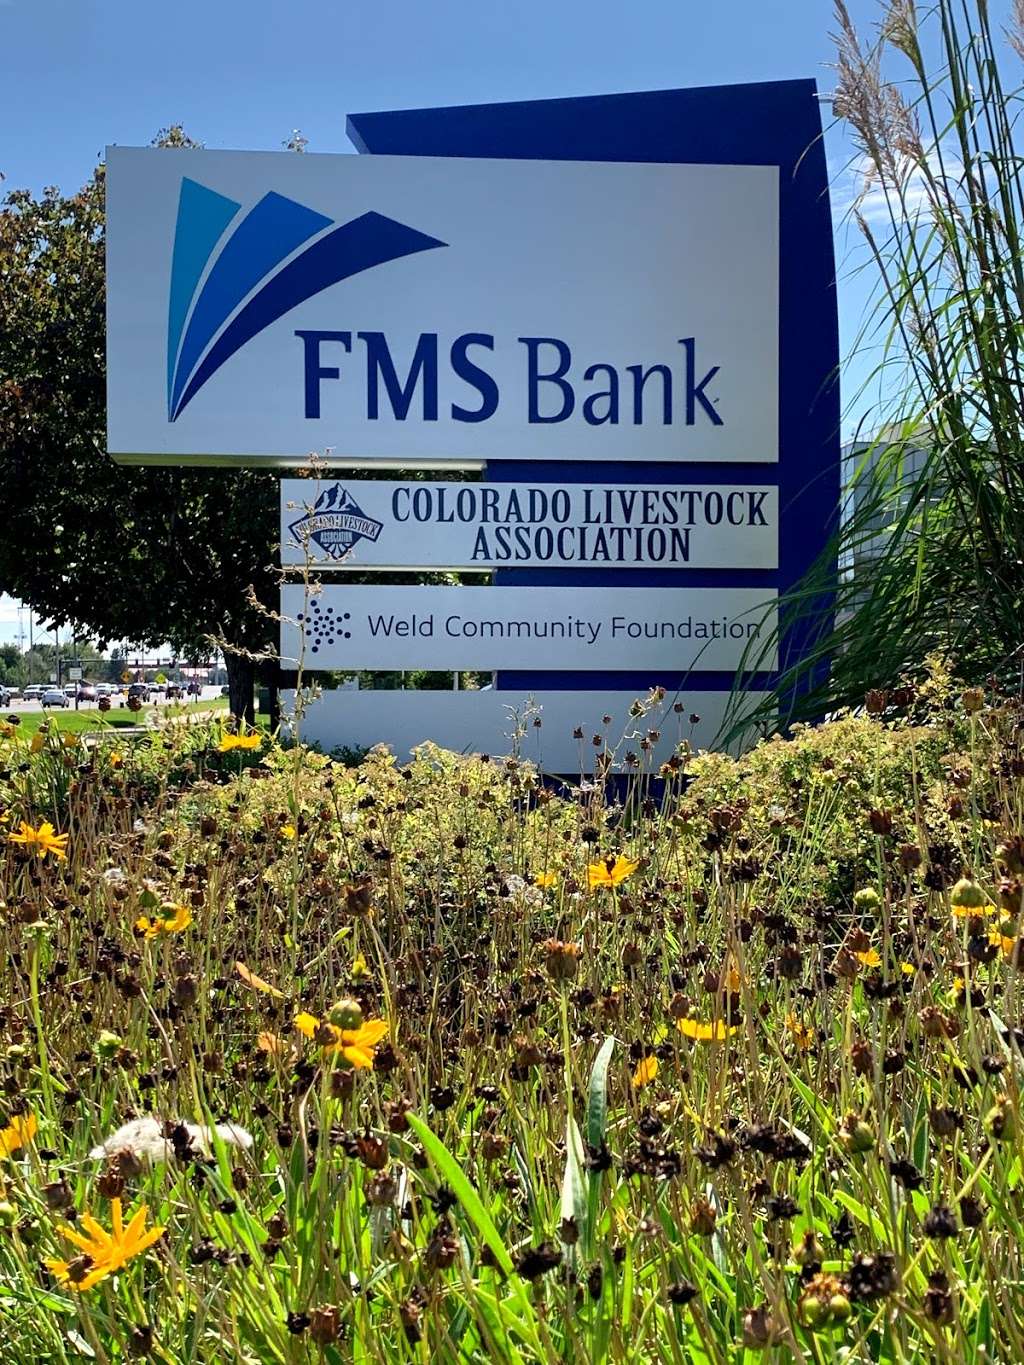 FMS Bank | 2425 35th Ave, Greeley, CO 80634 | Phone: (970) 673-4501